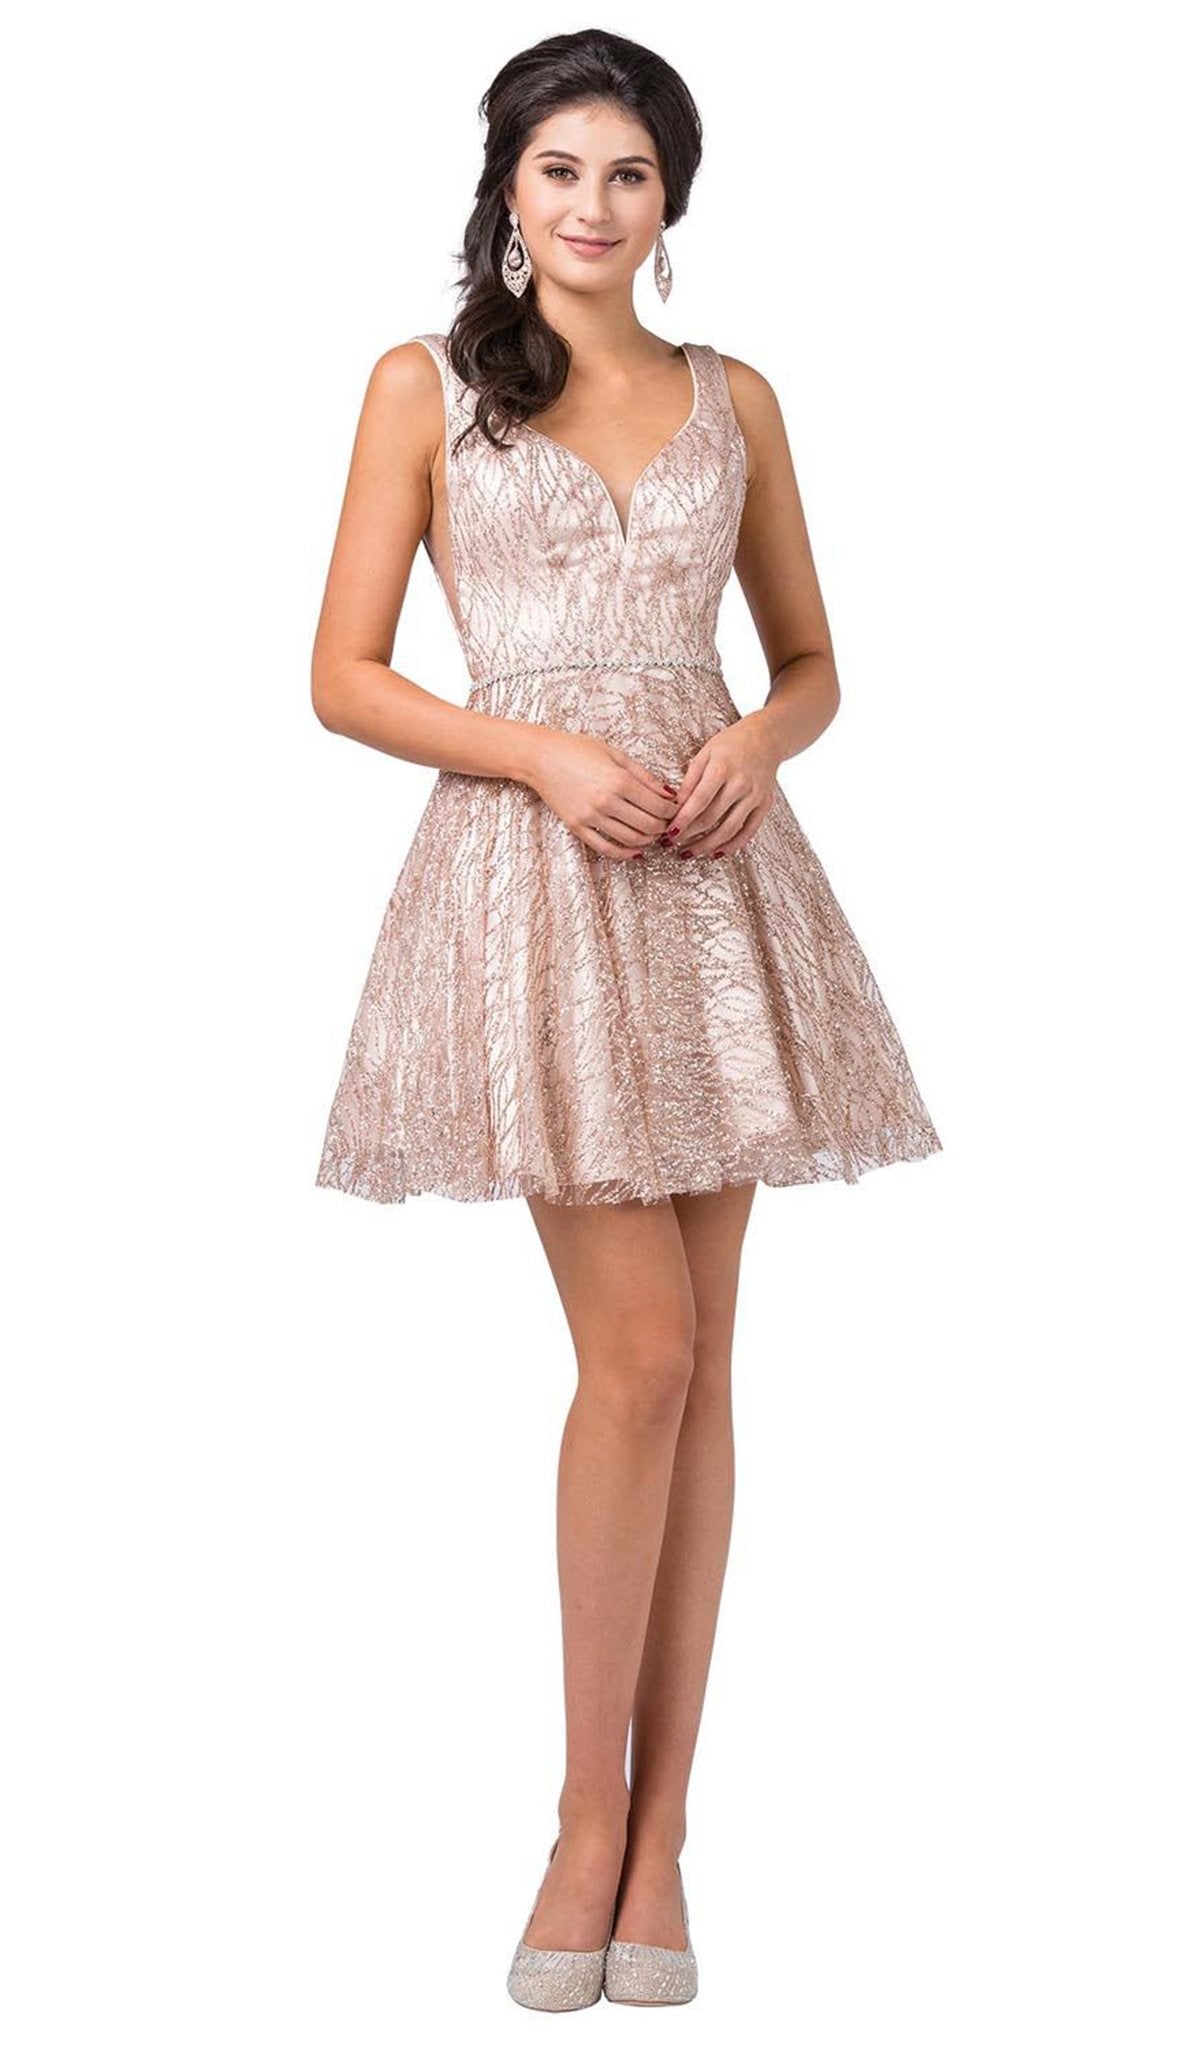 Dancing Queen - 3103 Glitter Mesh Fit and Flare Cocktail Dress In Pink and Gold